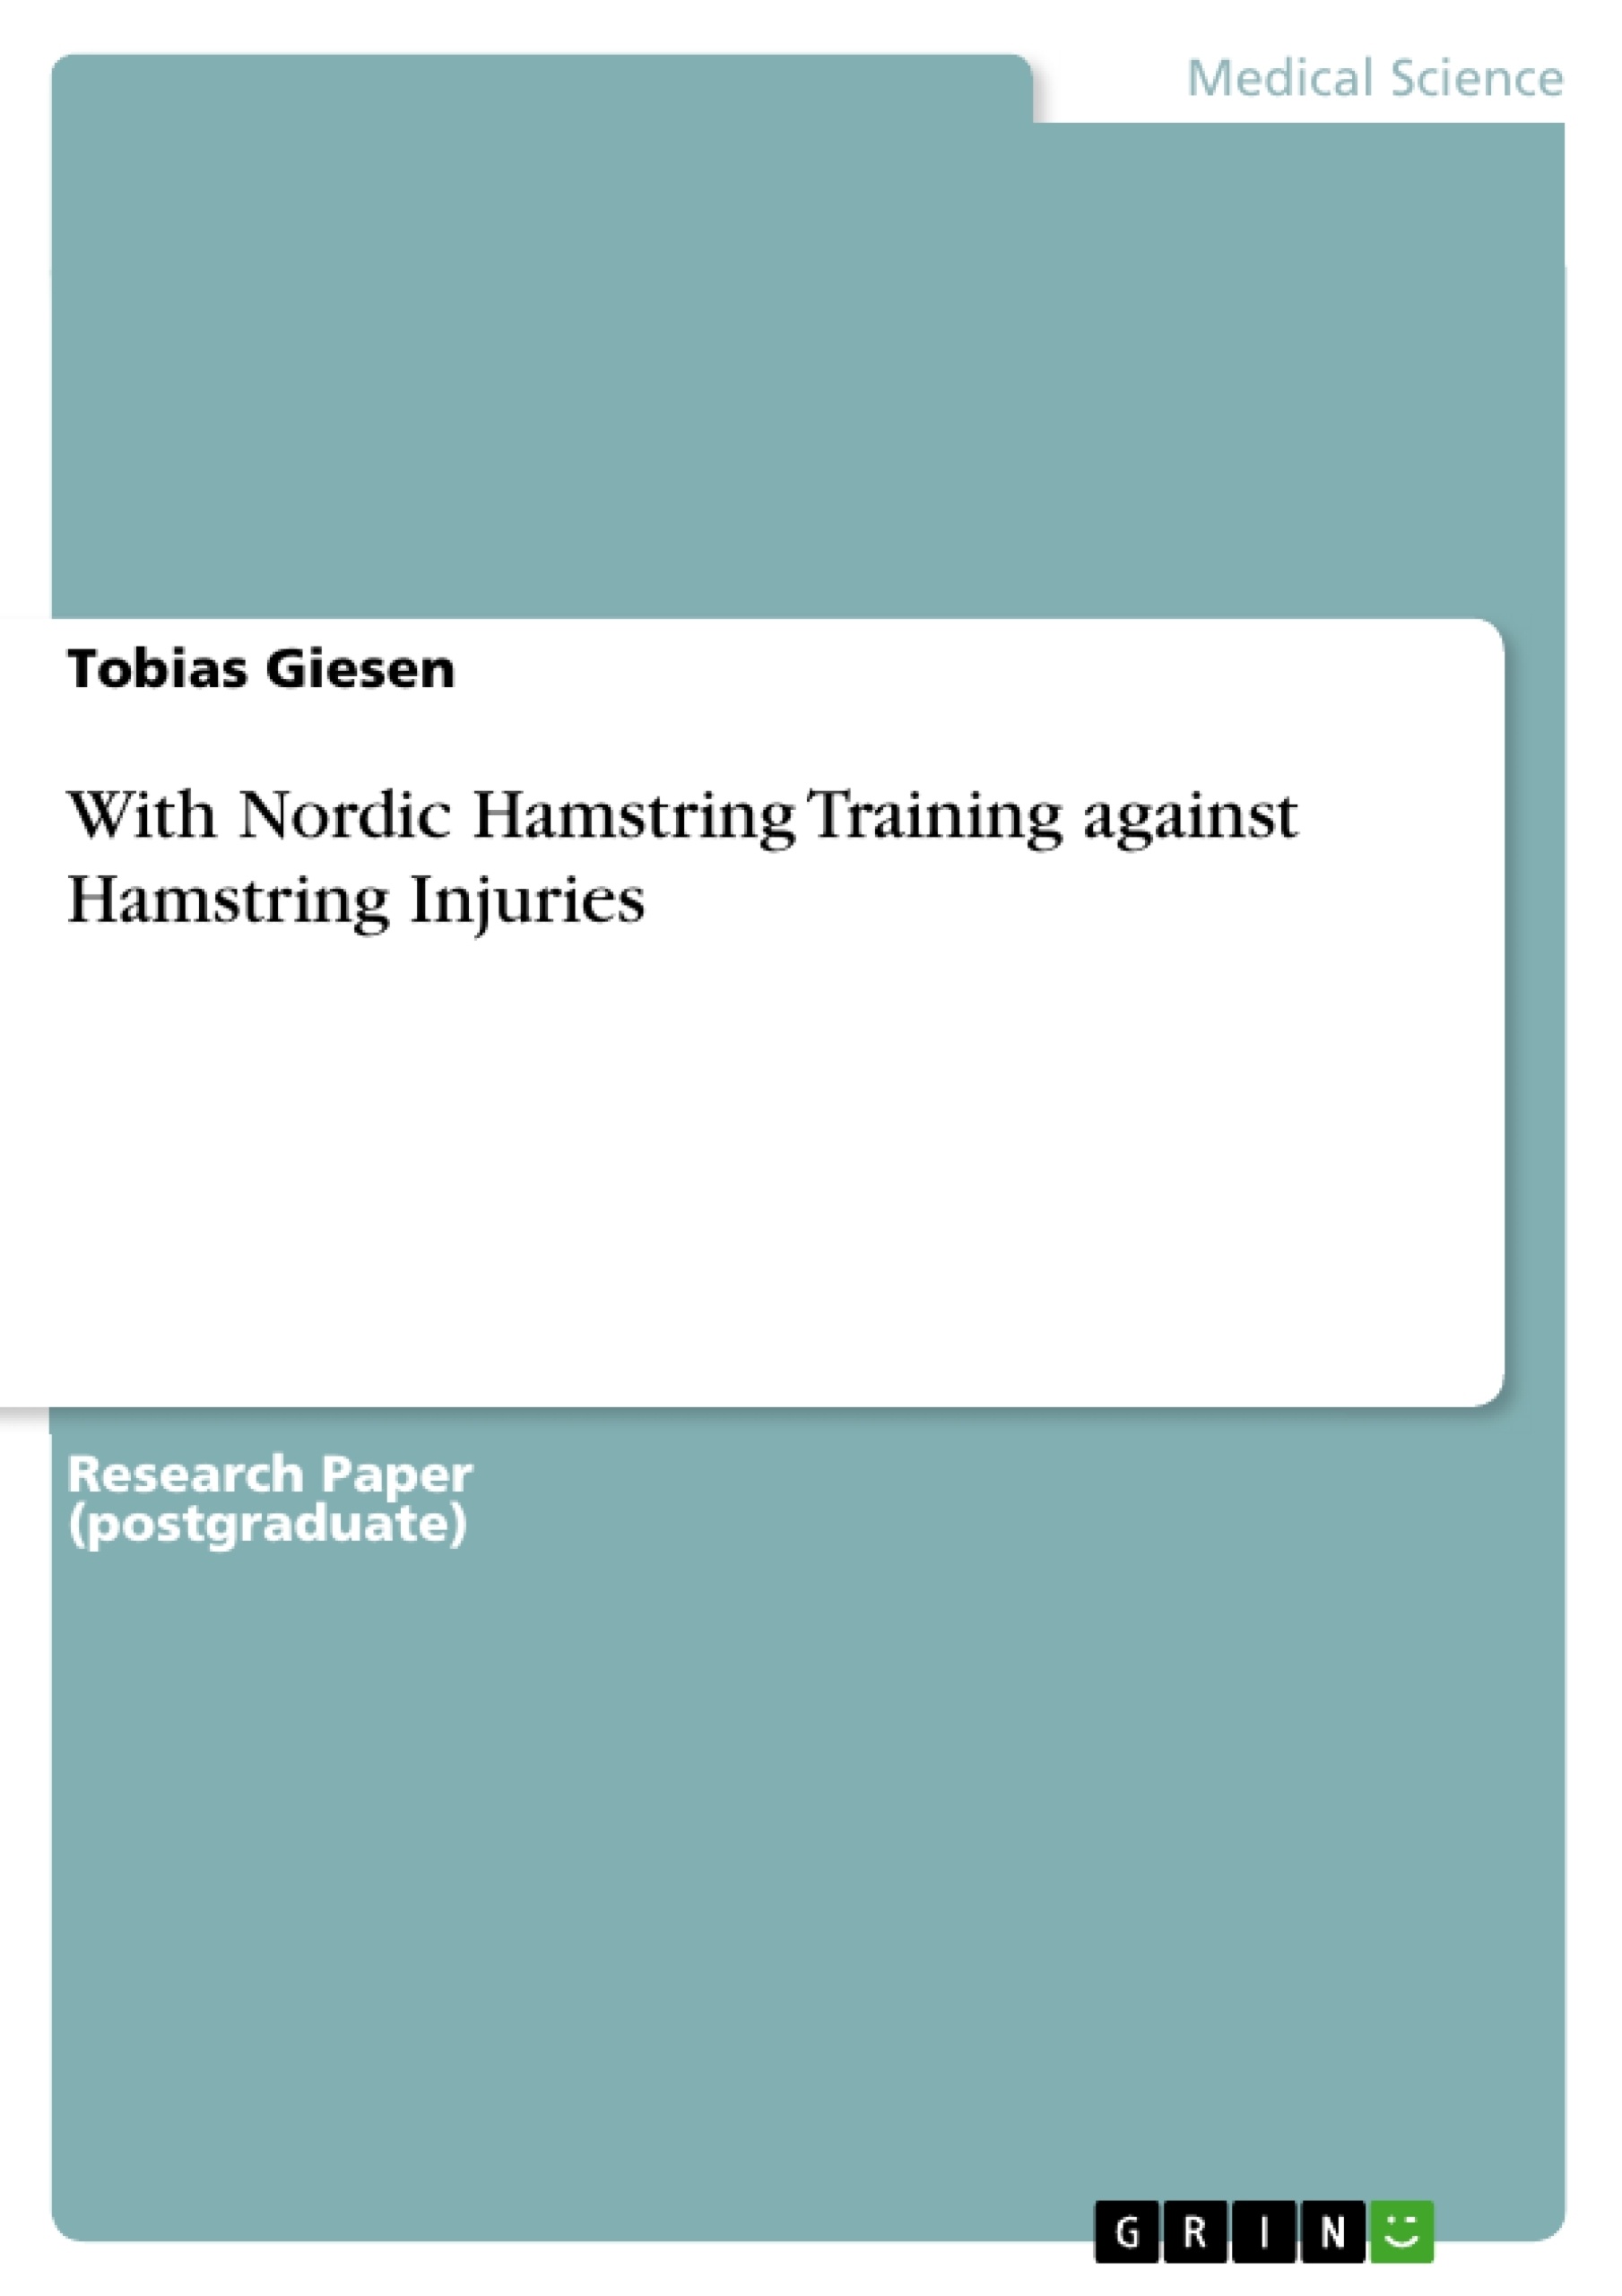 Título: With Nordic Hamstring Training against Hamstring Injuries